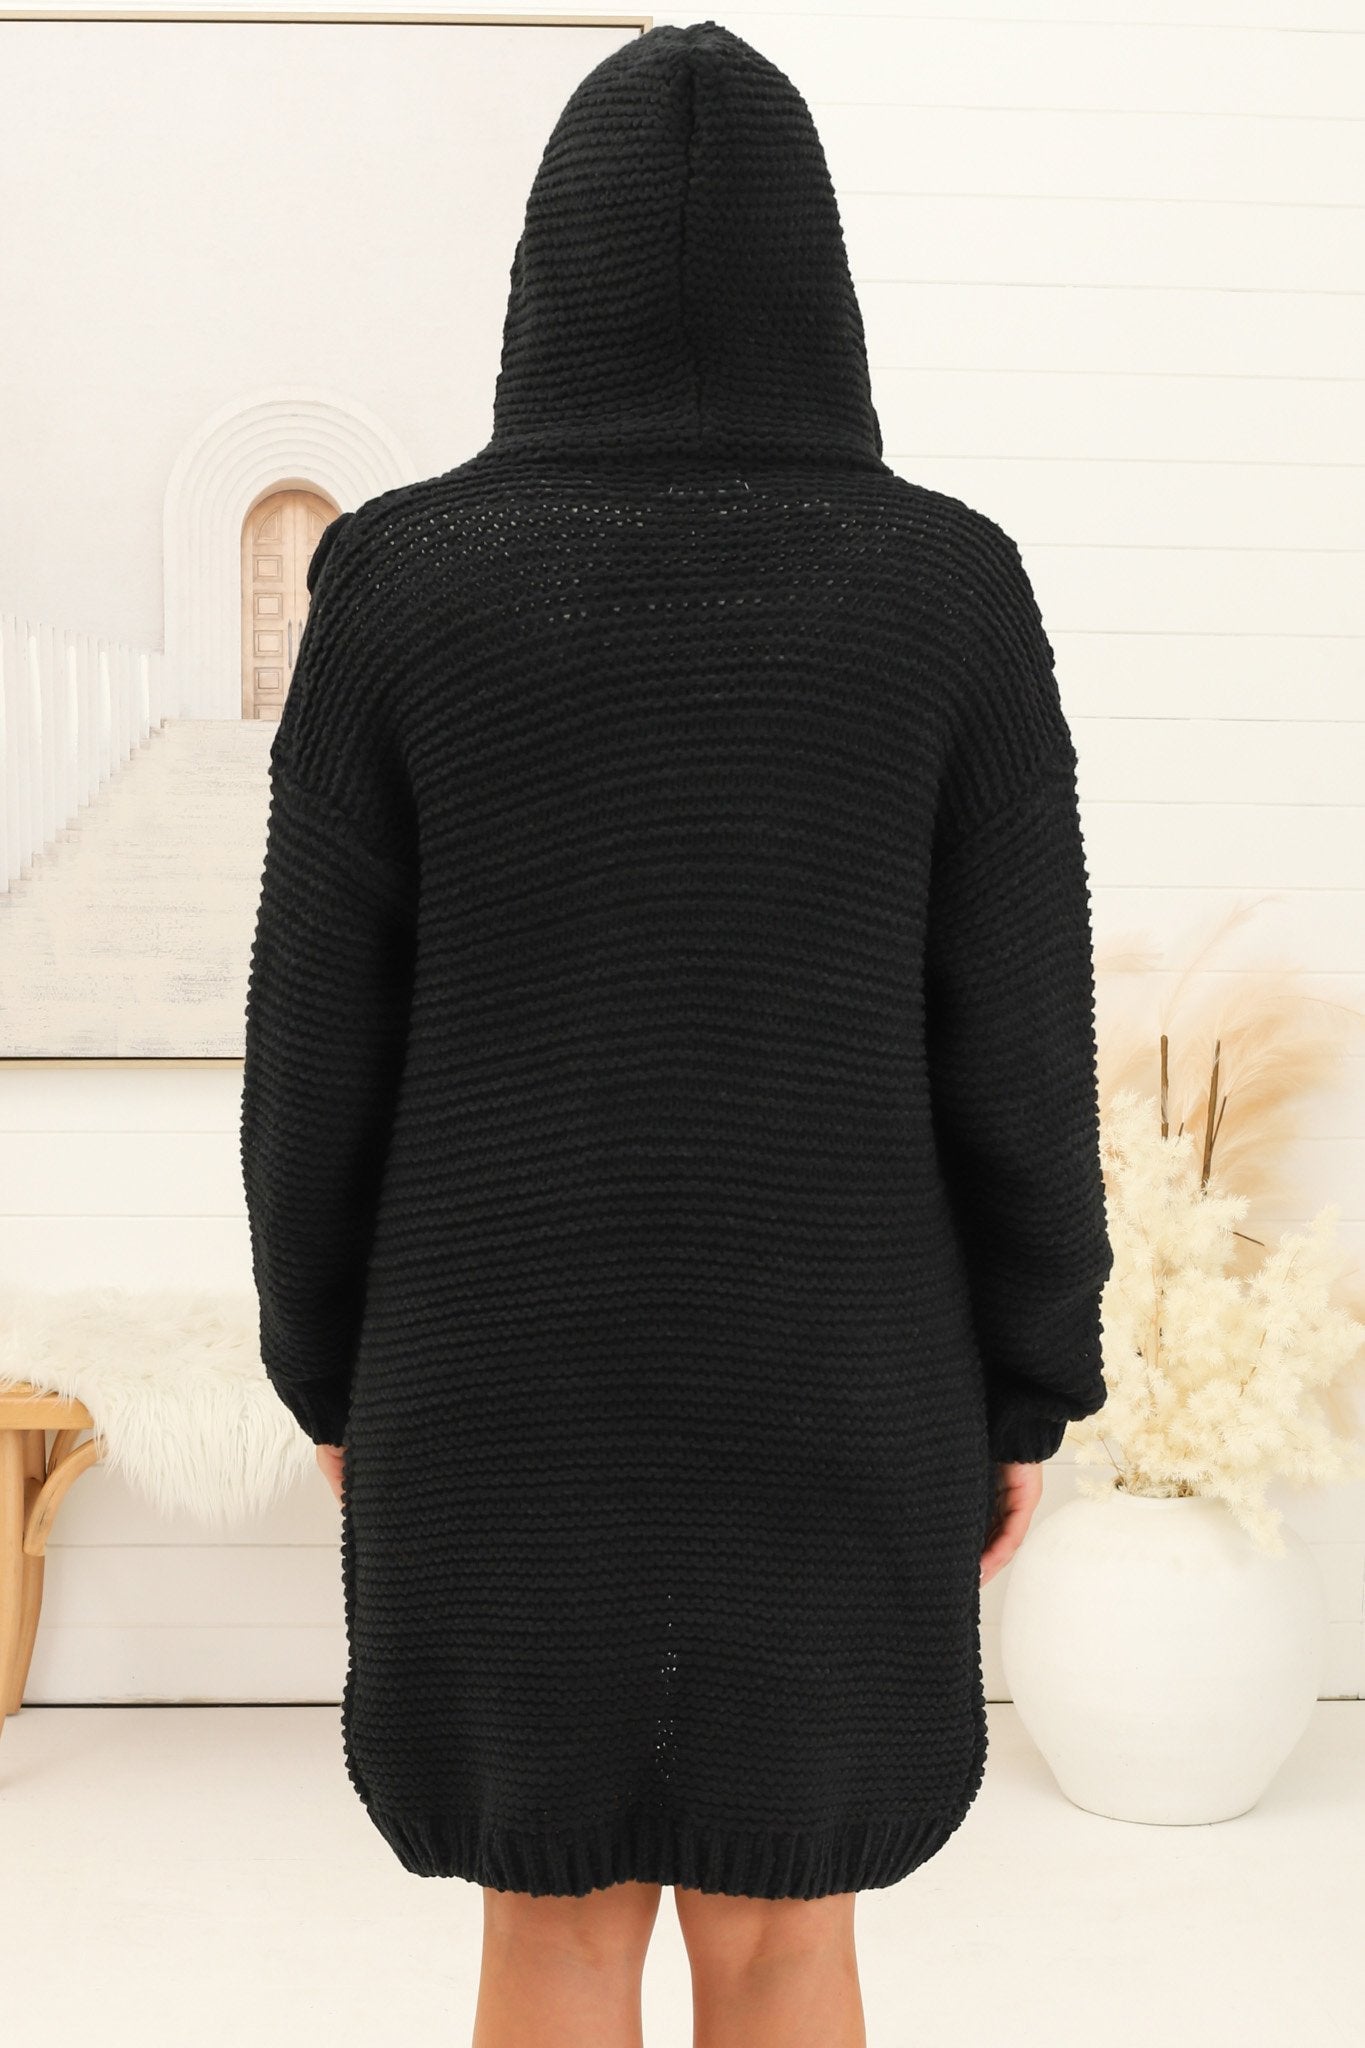 Toolara Cardigan - Thick Cable Knit Hooded Cardigan with Pocket in Black